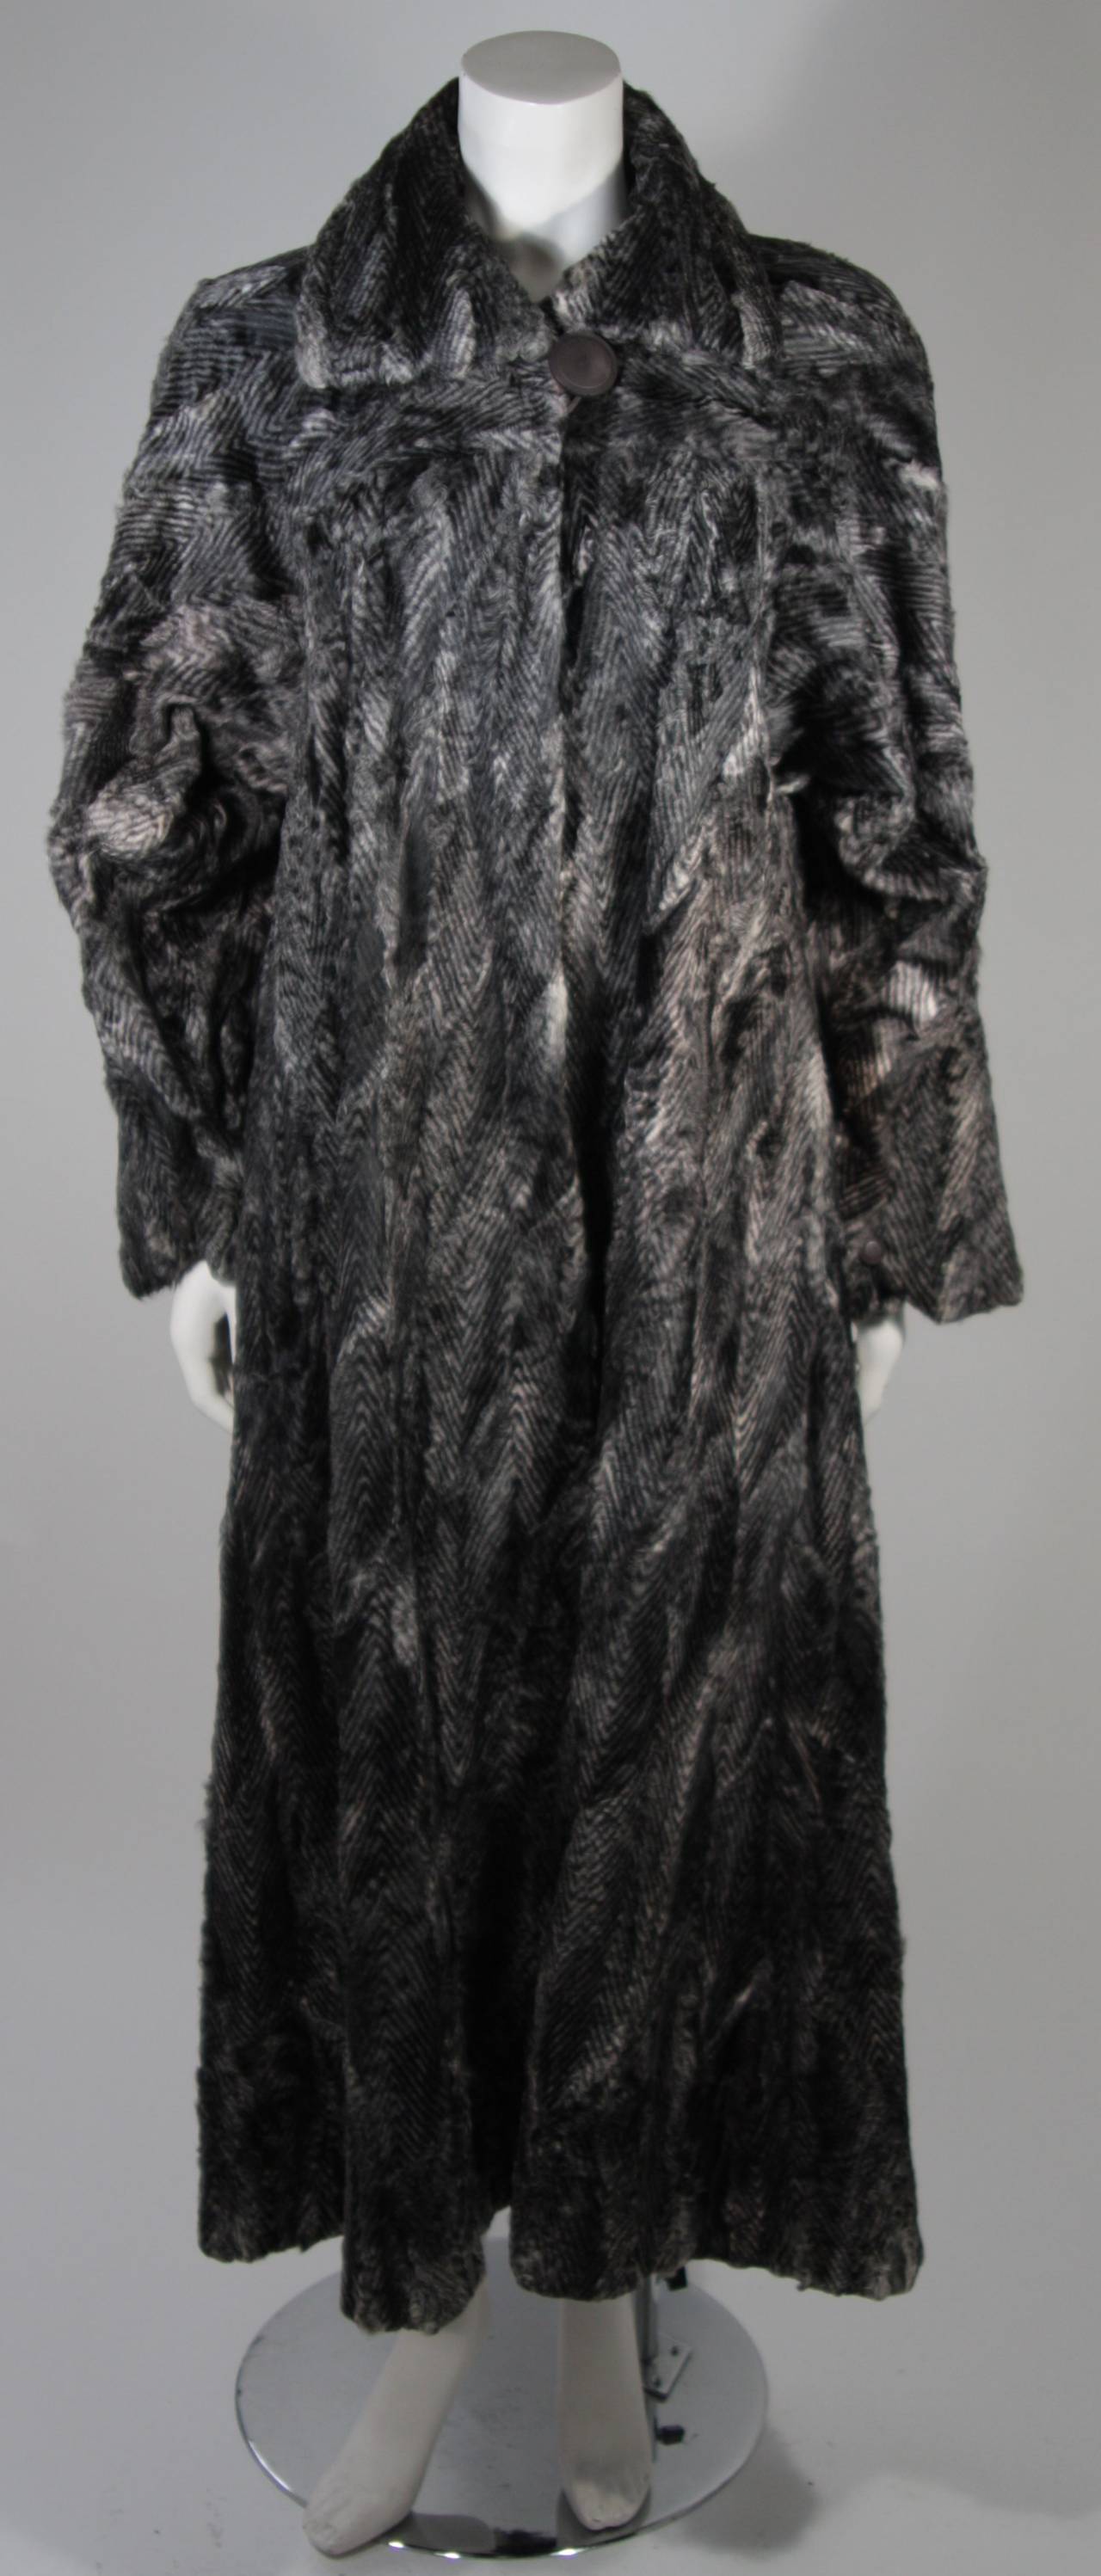 This Fendi coat is available for viewing at our Beverly Hills Boutique. We offer a large selection of evening gowns and luxury garments.

This coat is composed of black and grey sheared lamb with a chevron print. There are center front closures